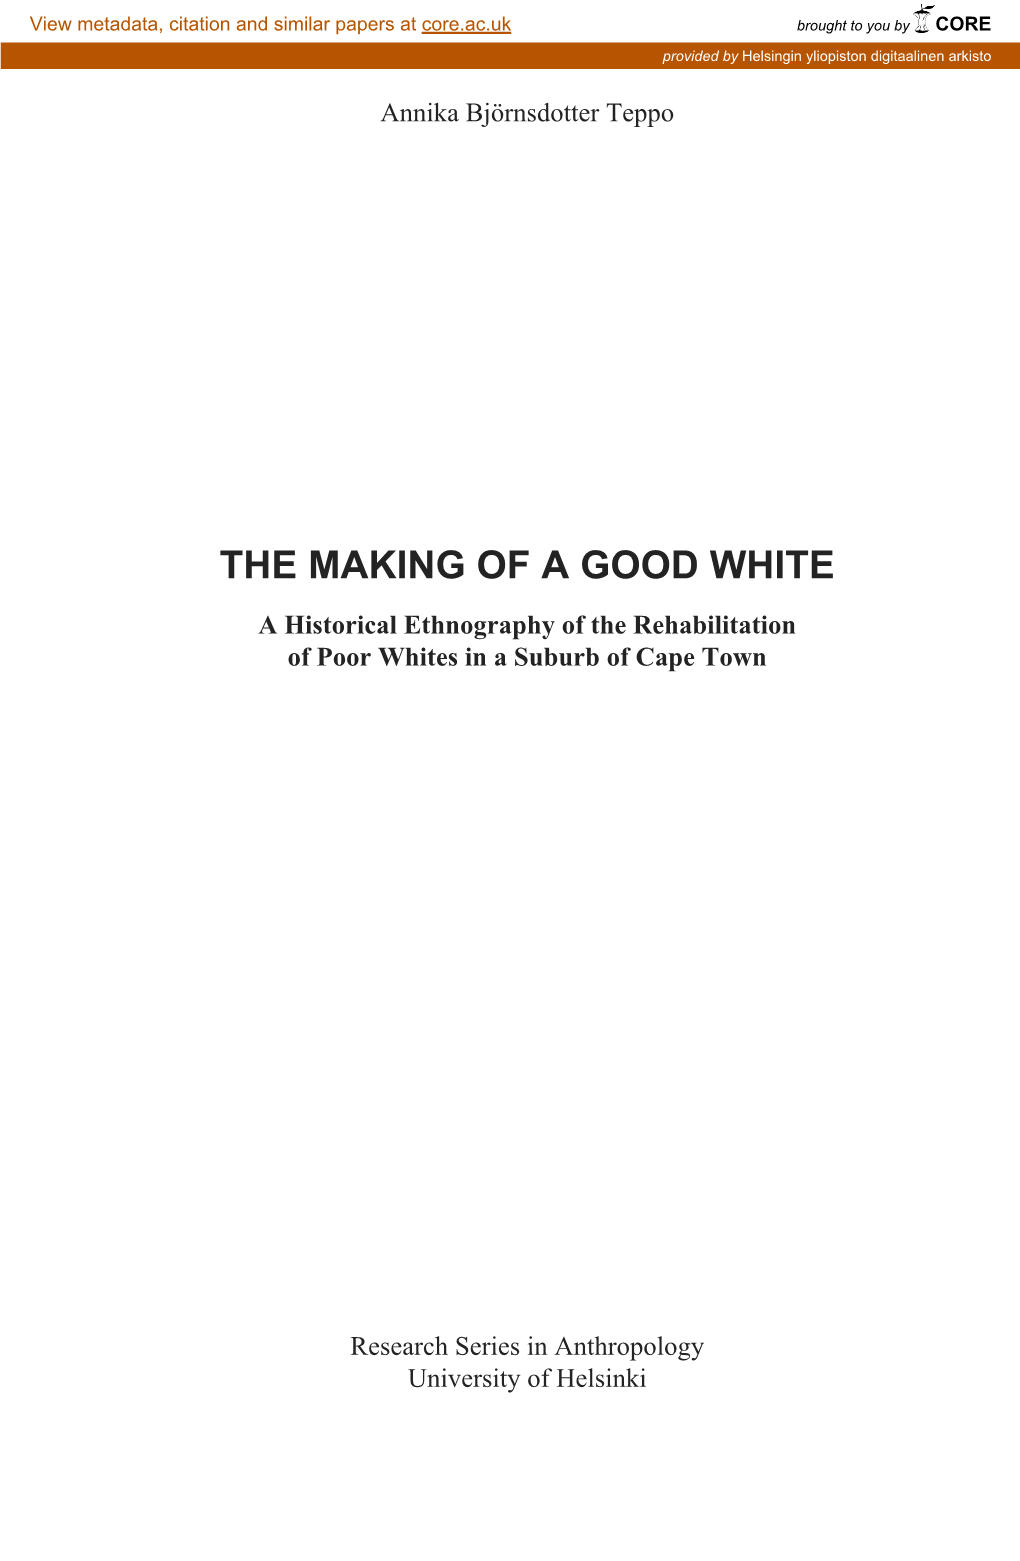 THE MAKING of a GOOD WHITE a Historical Ethnography of the Rehabilitation of Poor Whites in a Suburb of Cape Town